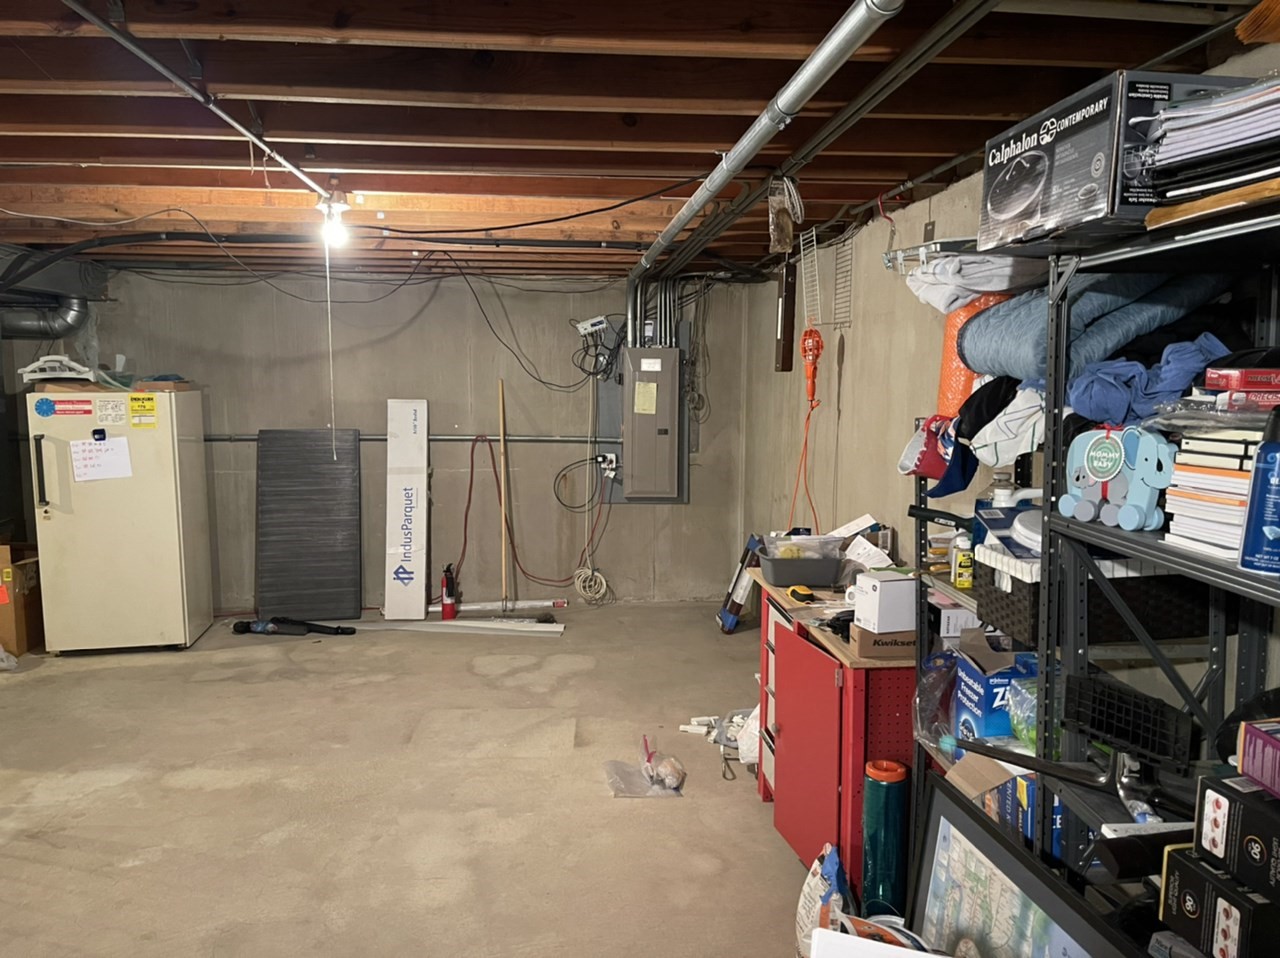 Basement prior to remodel with unfinished floors, walls, and ceiling